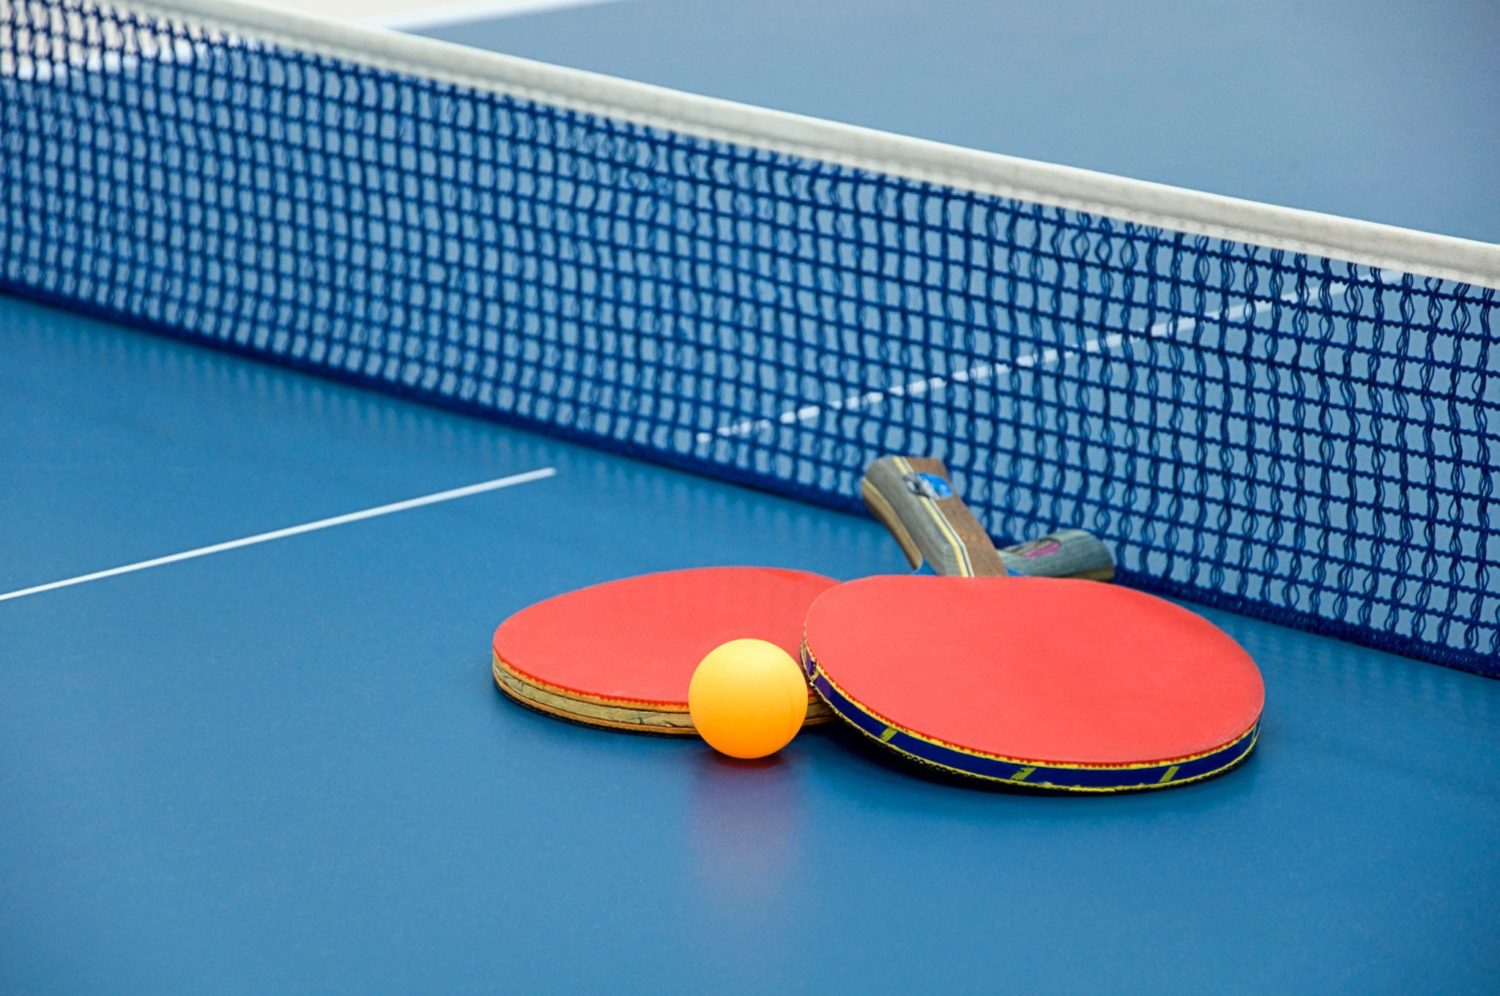 No game room is complete without ping pong! Learn how to play ping pong and read the ping pong rules at www.GameOnFamily.com. Game on! #tabletennis